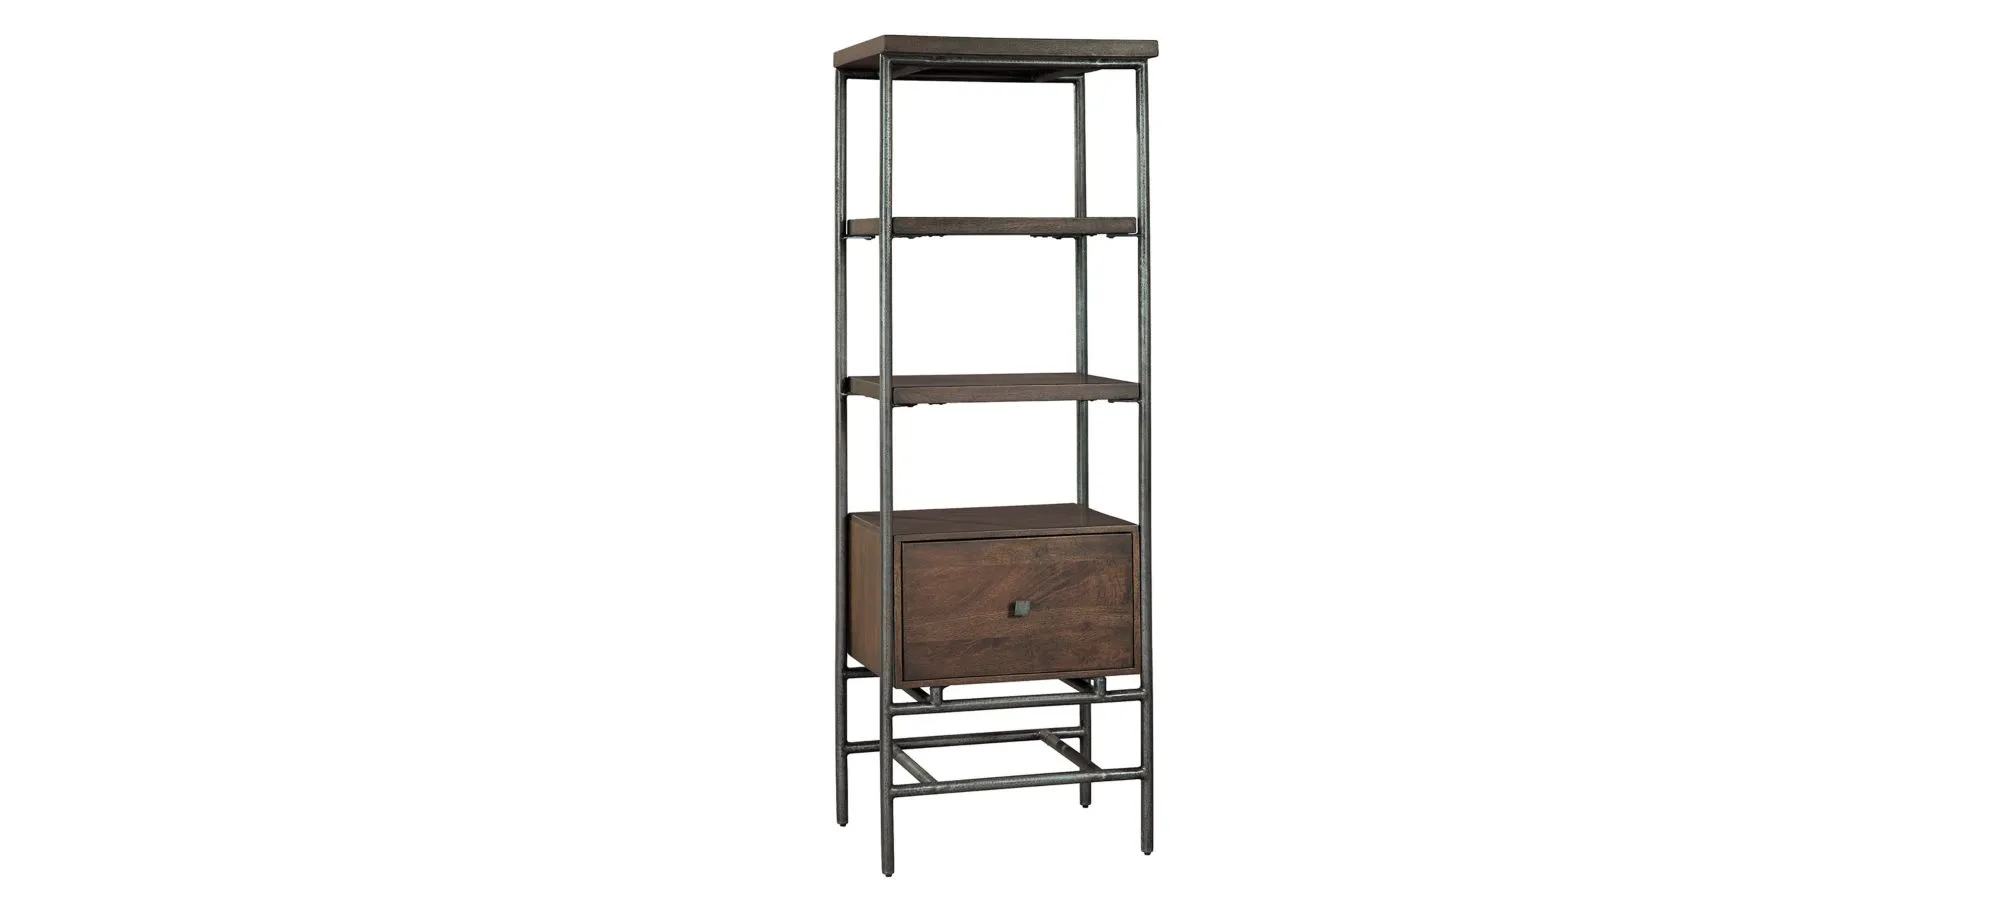 Hekman Open Shelving in SPECIAL RESERVE by Hekman Furniture Company